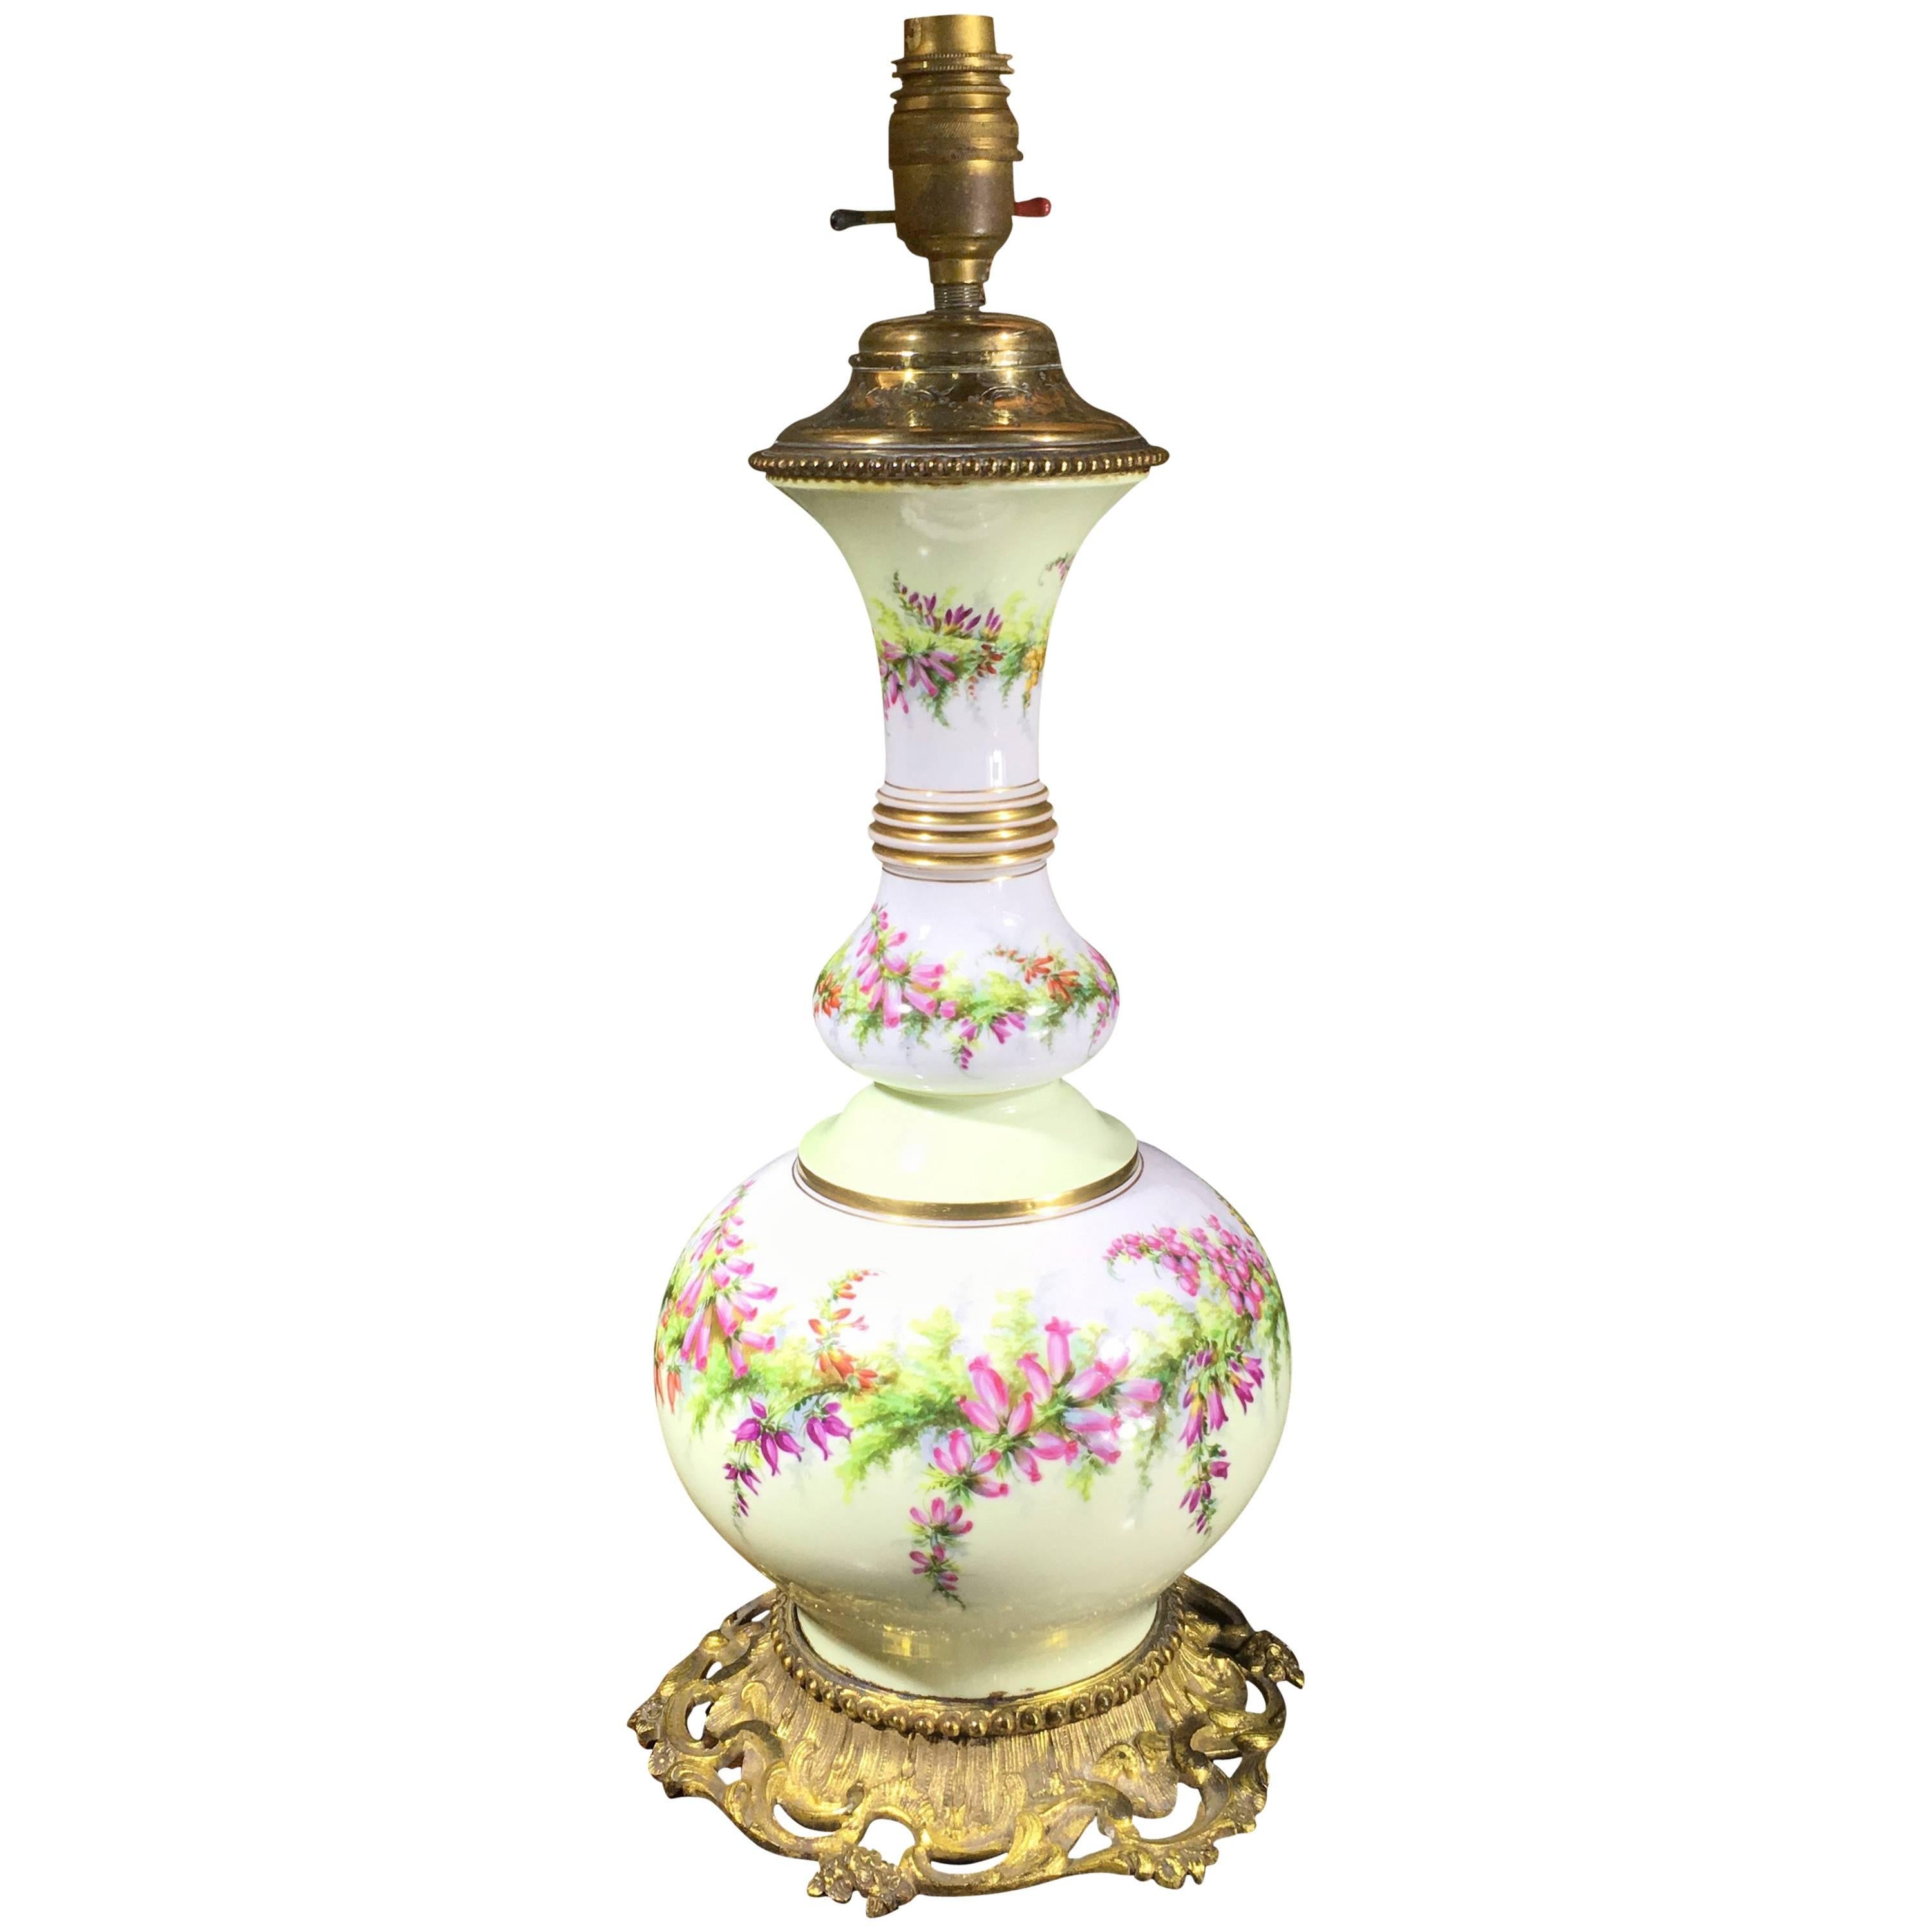 Large Victorian Porcelain Vase with Early Light Conversion, circa 1885